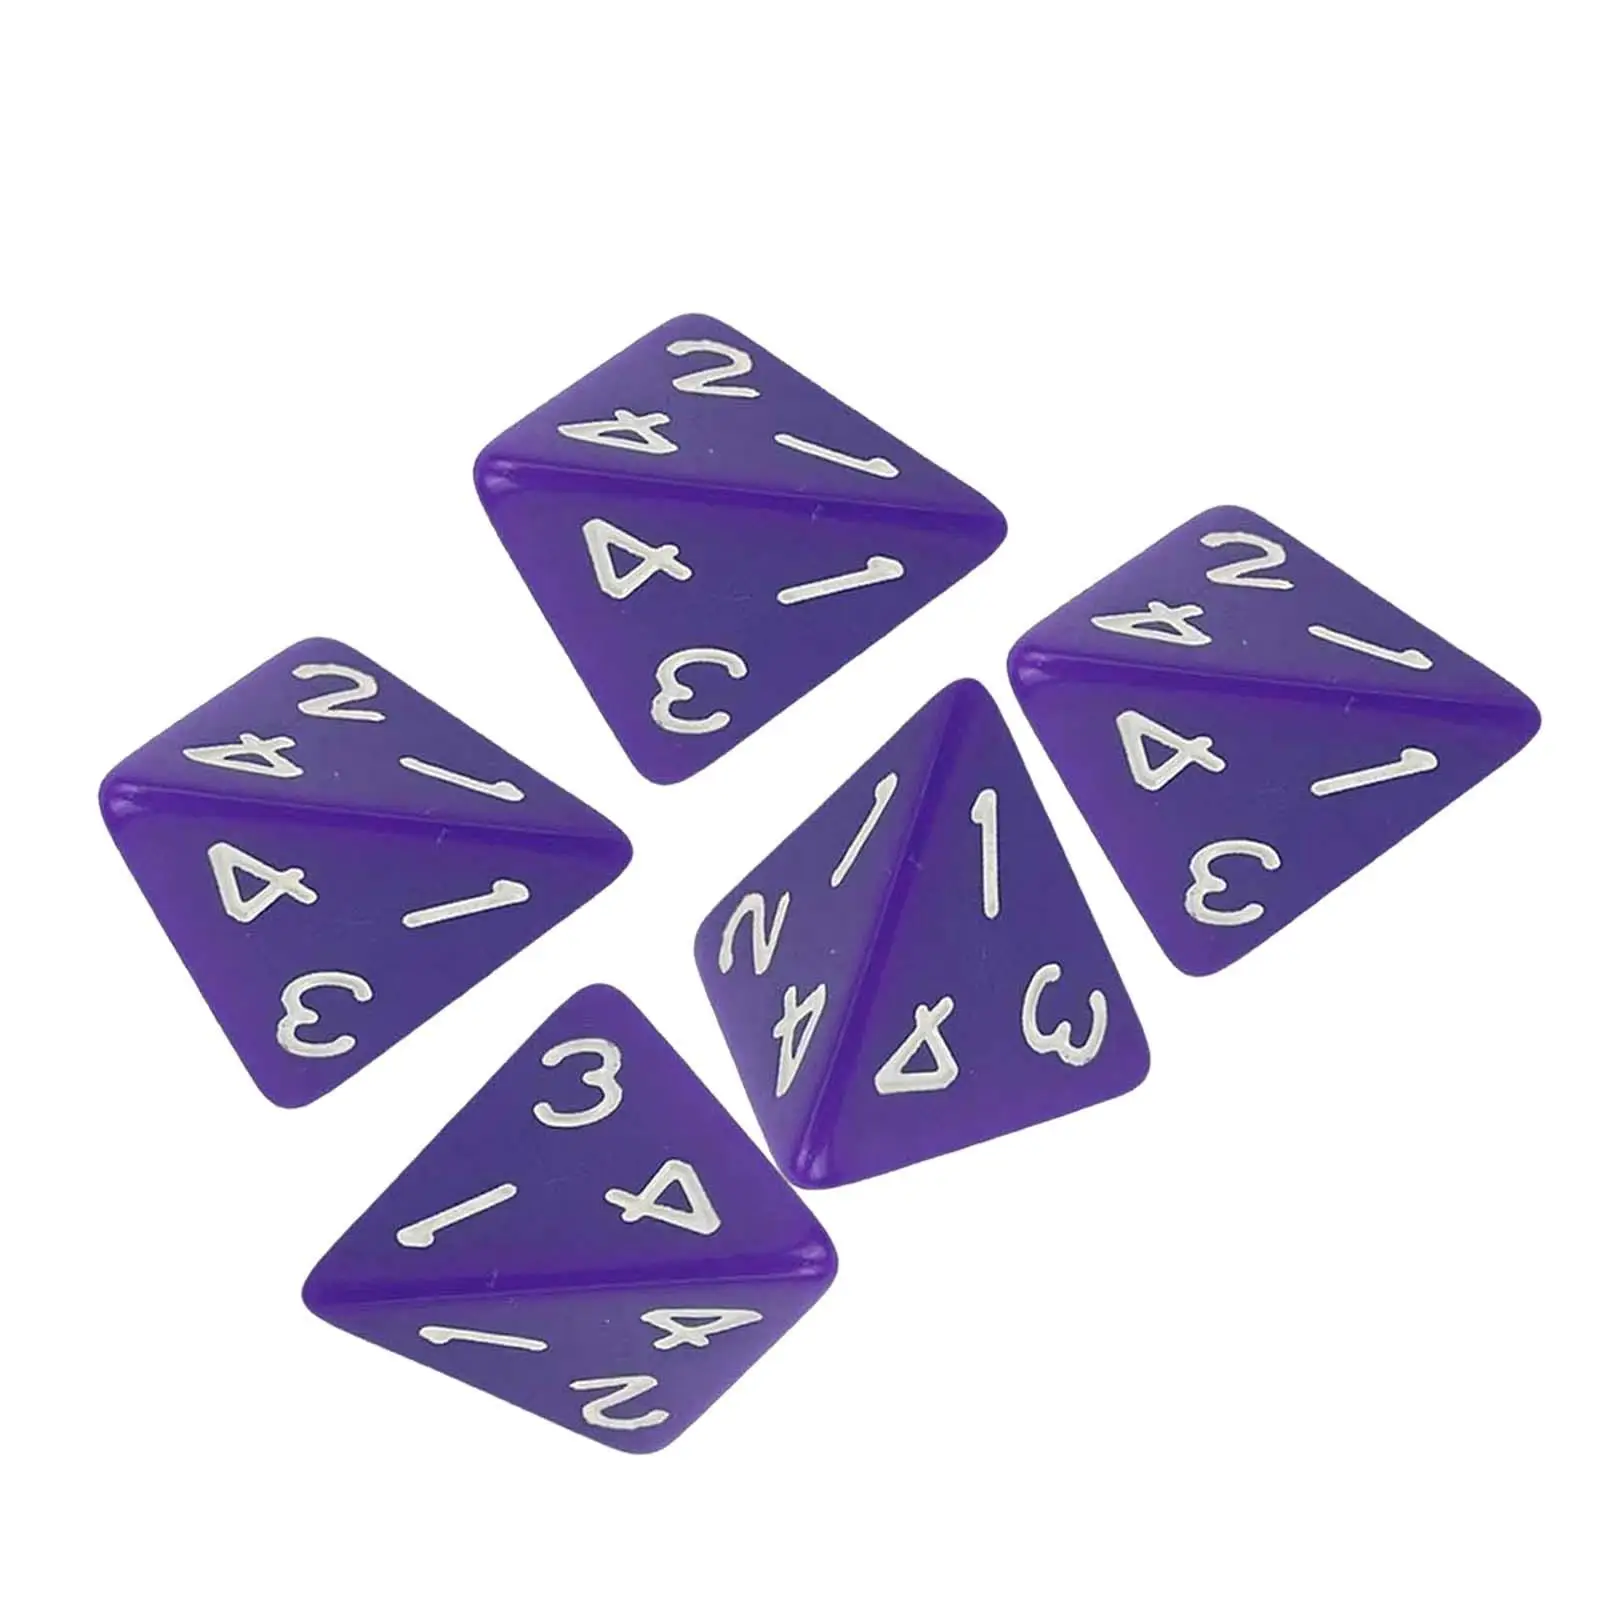 5Pcs Polyhedral Dice Set 4 Sided Dice D4 Multi Sided Game Dices Math Counting Teaching Toy for Role Playing Table Board Games